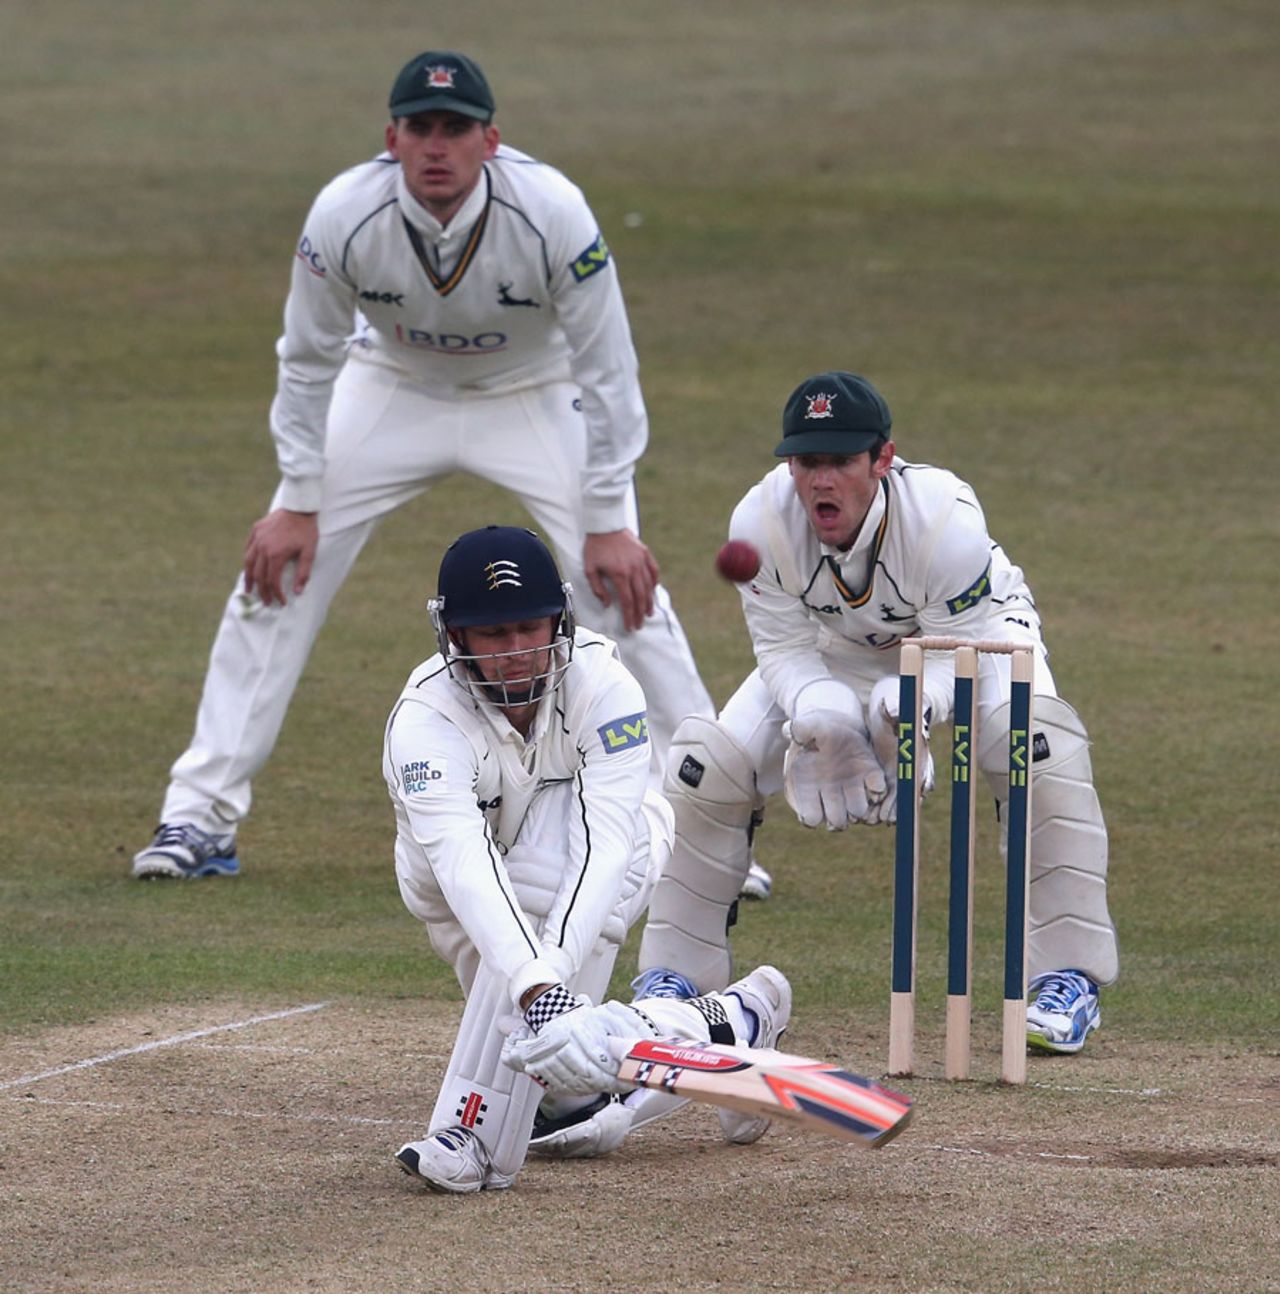 Gareth Berg sweeps during a sixth-wicket partnership of 116, Nottinghamshire v Middlesex, County Championship, Division One, Trent Bridge, 2nd day, April 11, 2013